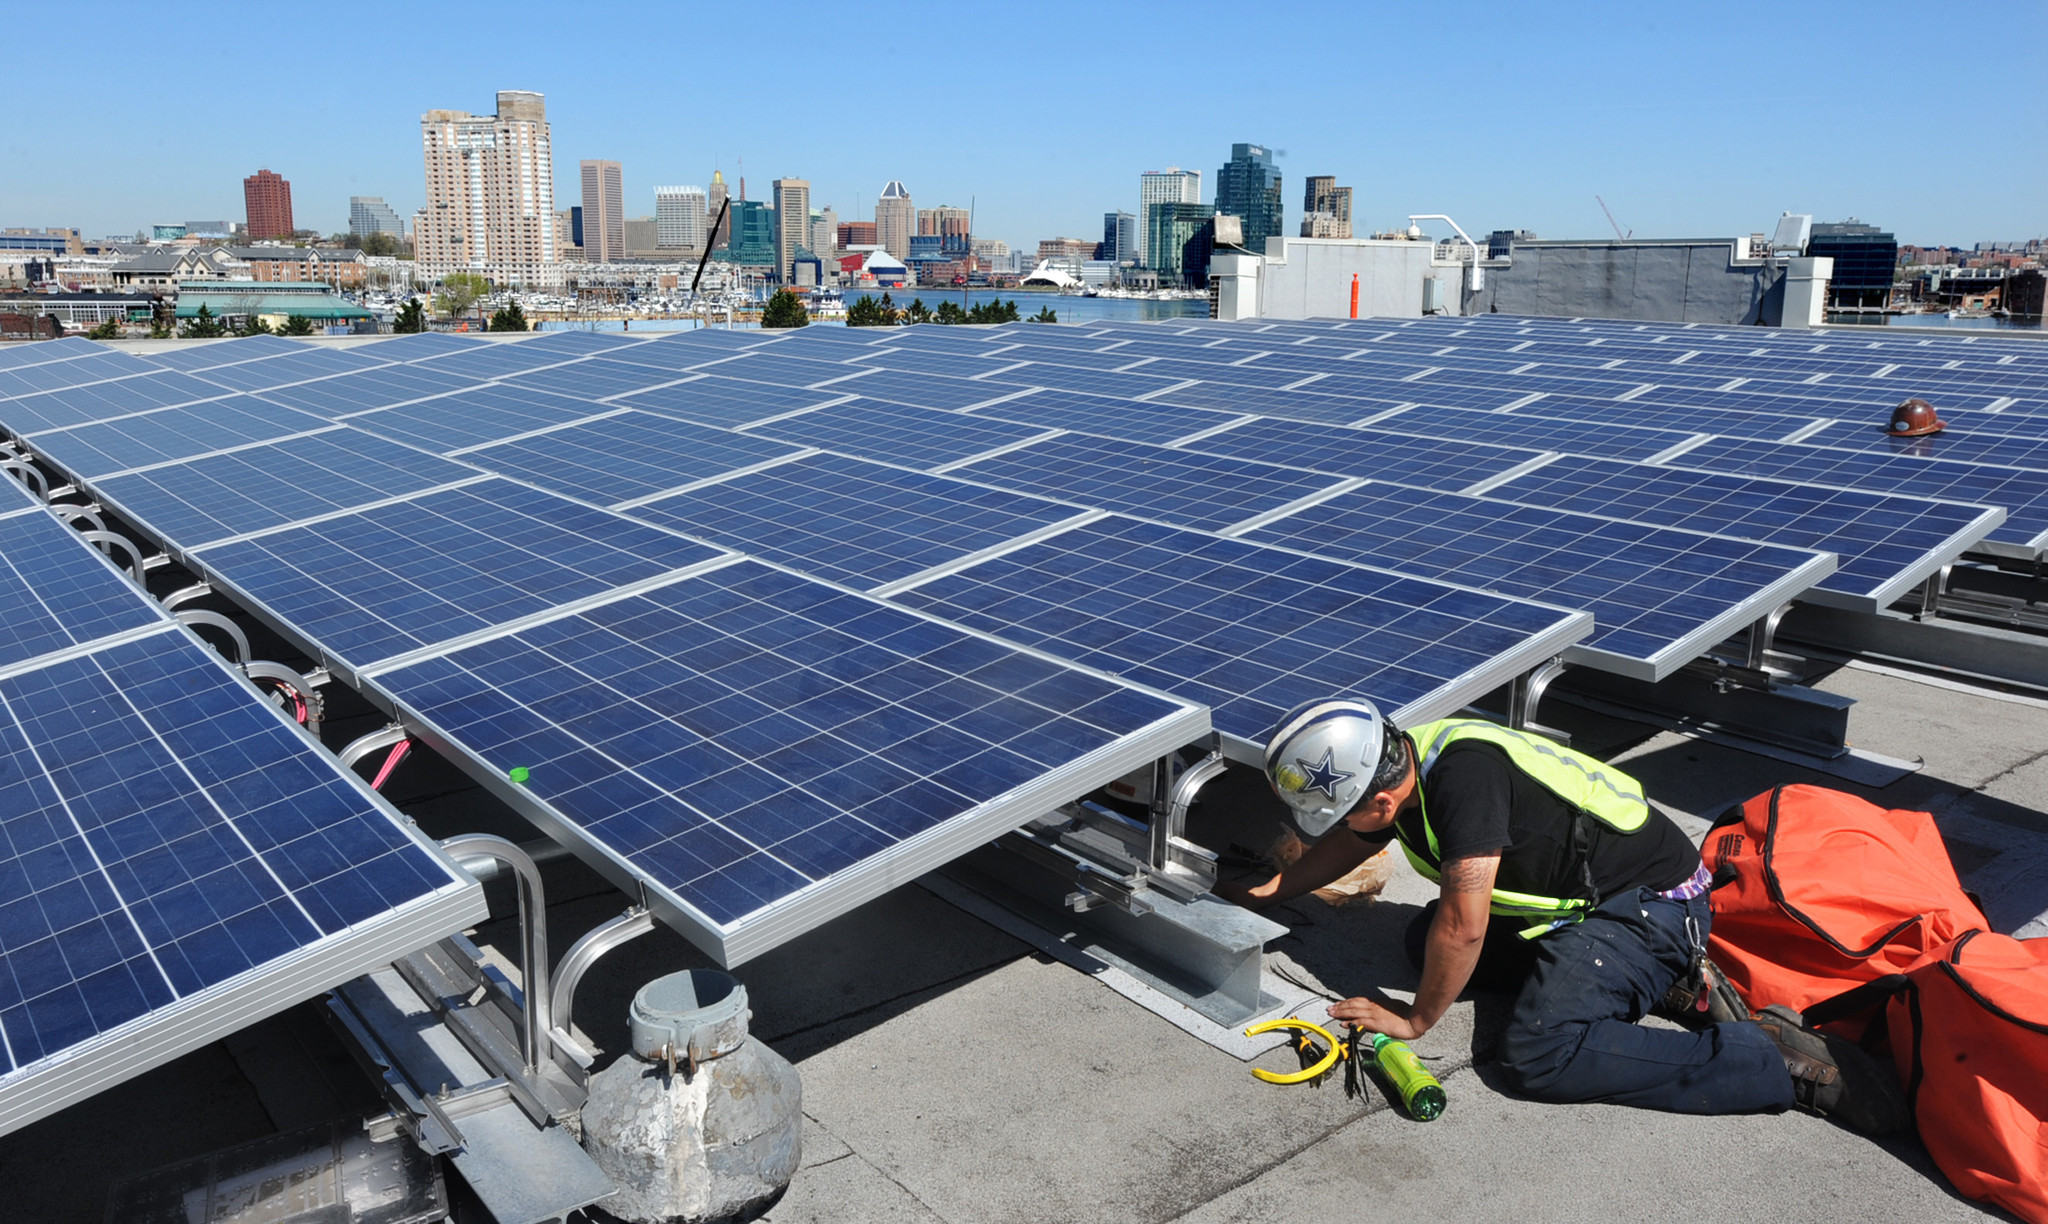 Community solar program would expand solar to renters, people Baltimore Sun